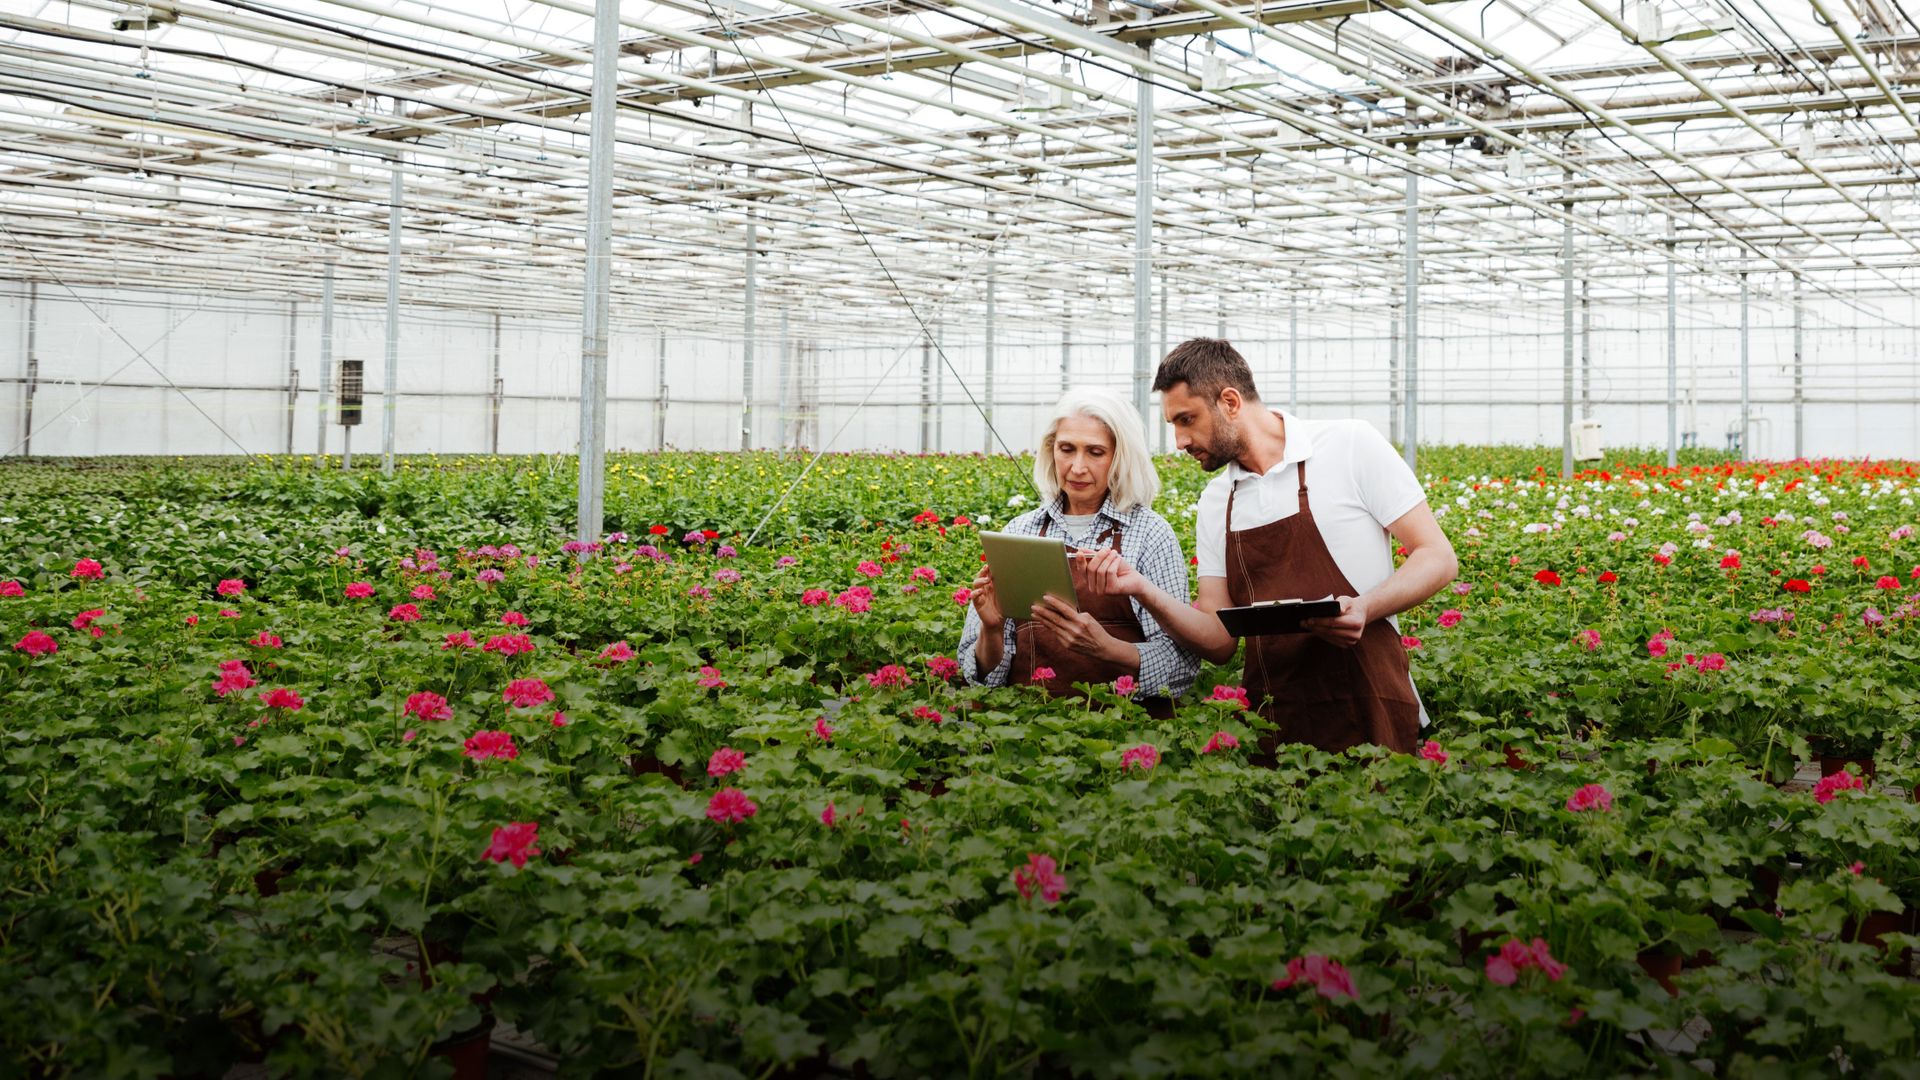 Image of two farm workers conducting a self-assessment in a floriculture greenhouse